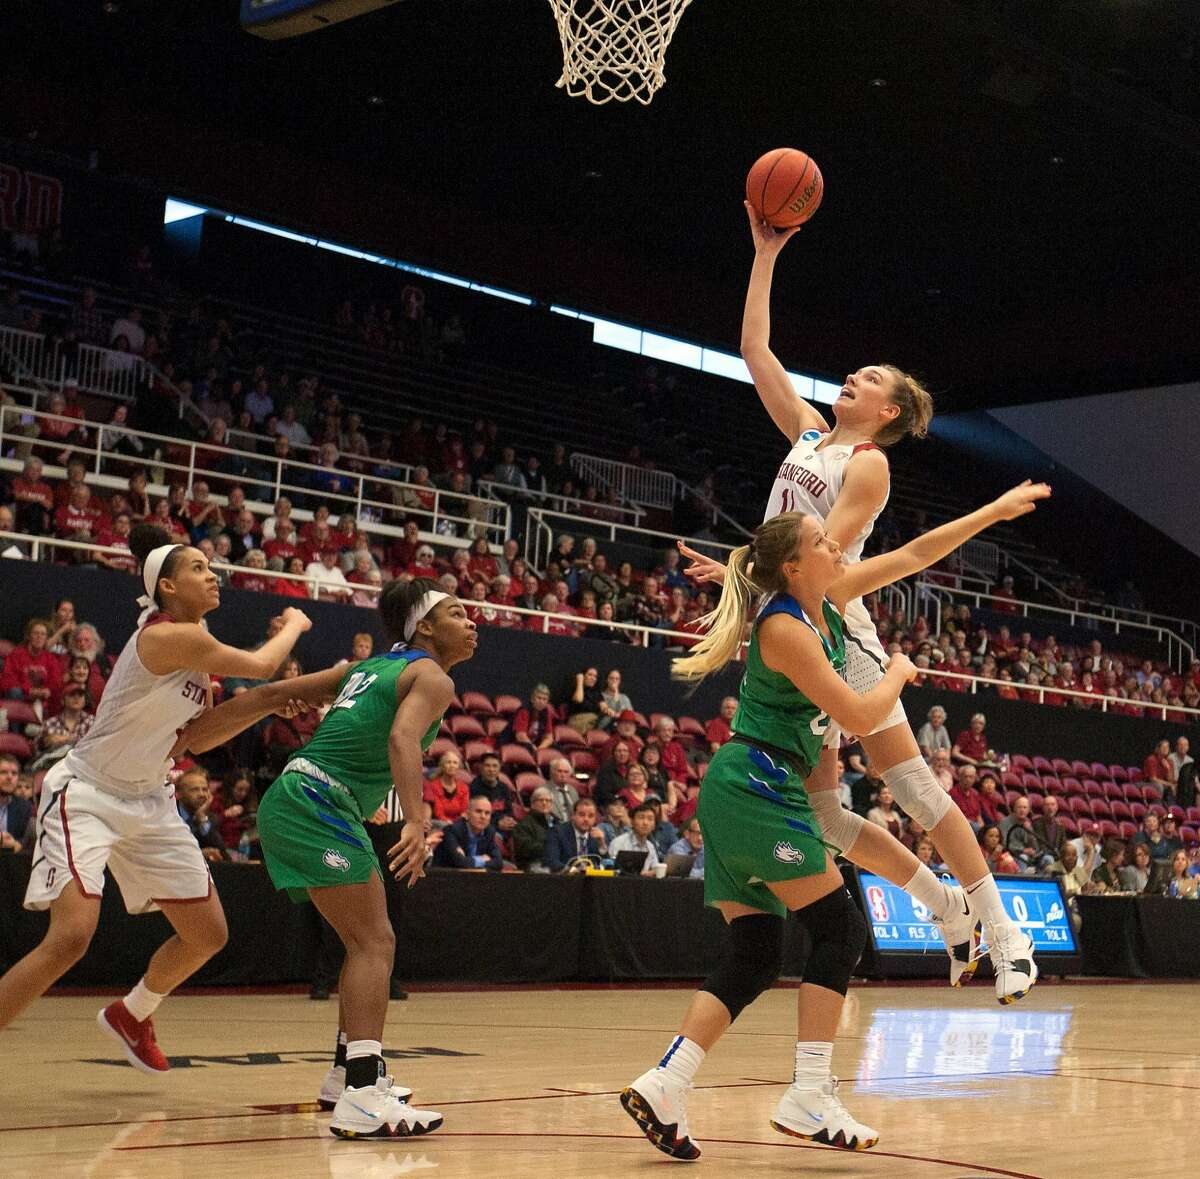 Stanford forward Alanna Smith (11) scores over Florida Gulf Coast guard Taylor Gradinjan (24) during the first half of an NCAA Division I Women's Basketball Championship game, on Monday, March 19, 2018 in Stanford, Calif.